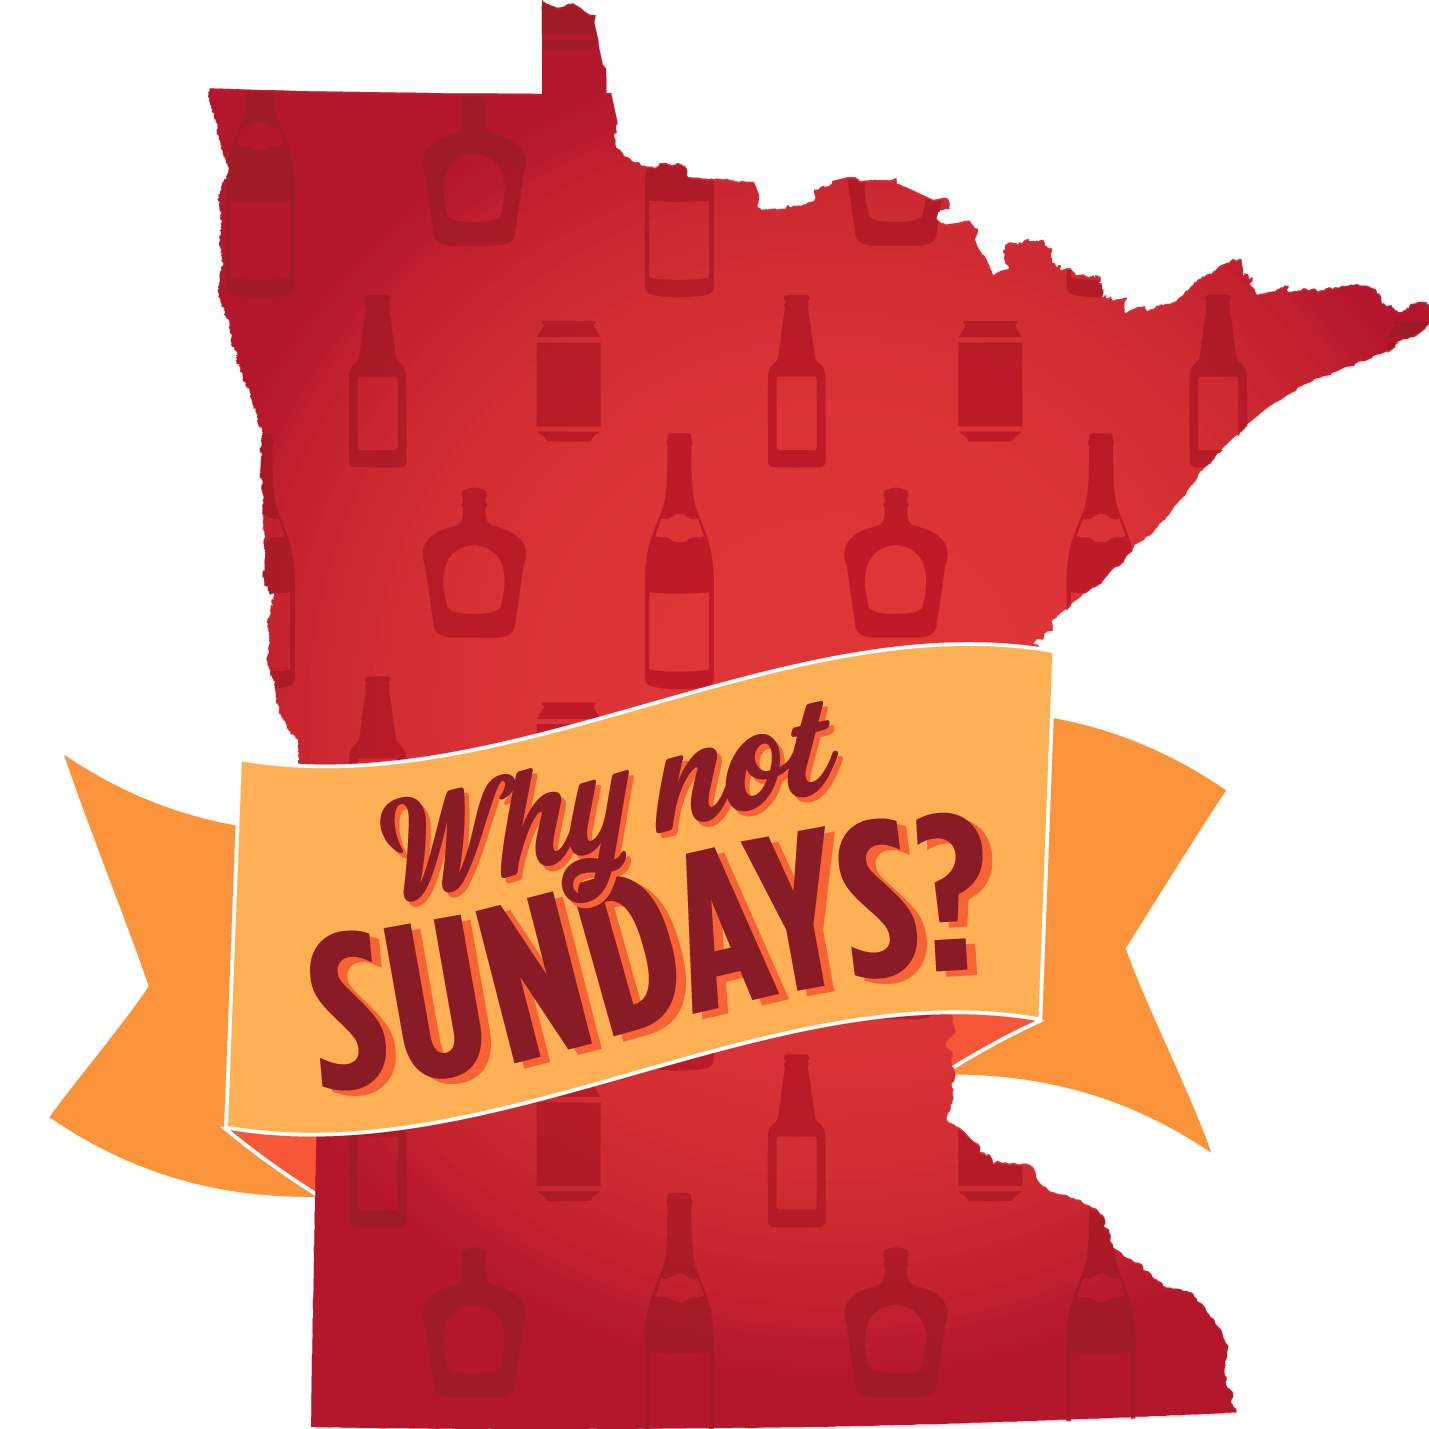 Let's allow consumers to shop for beer, wine and spirits on Sundays. #SundaySalesMN